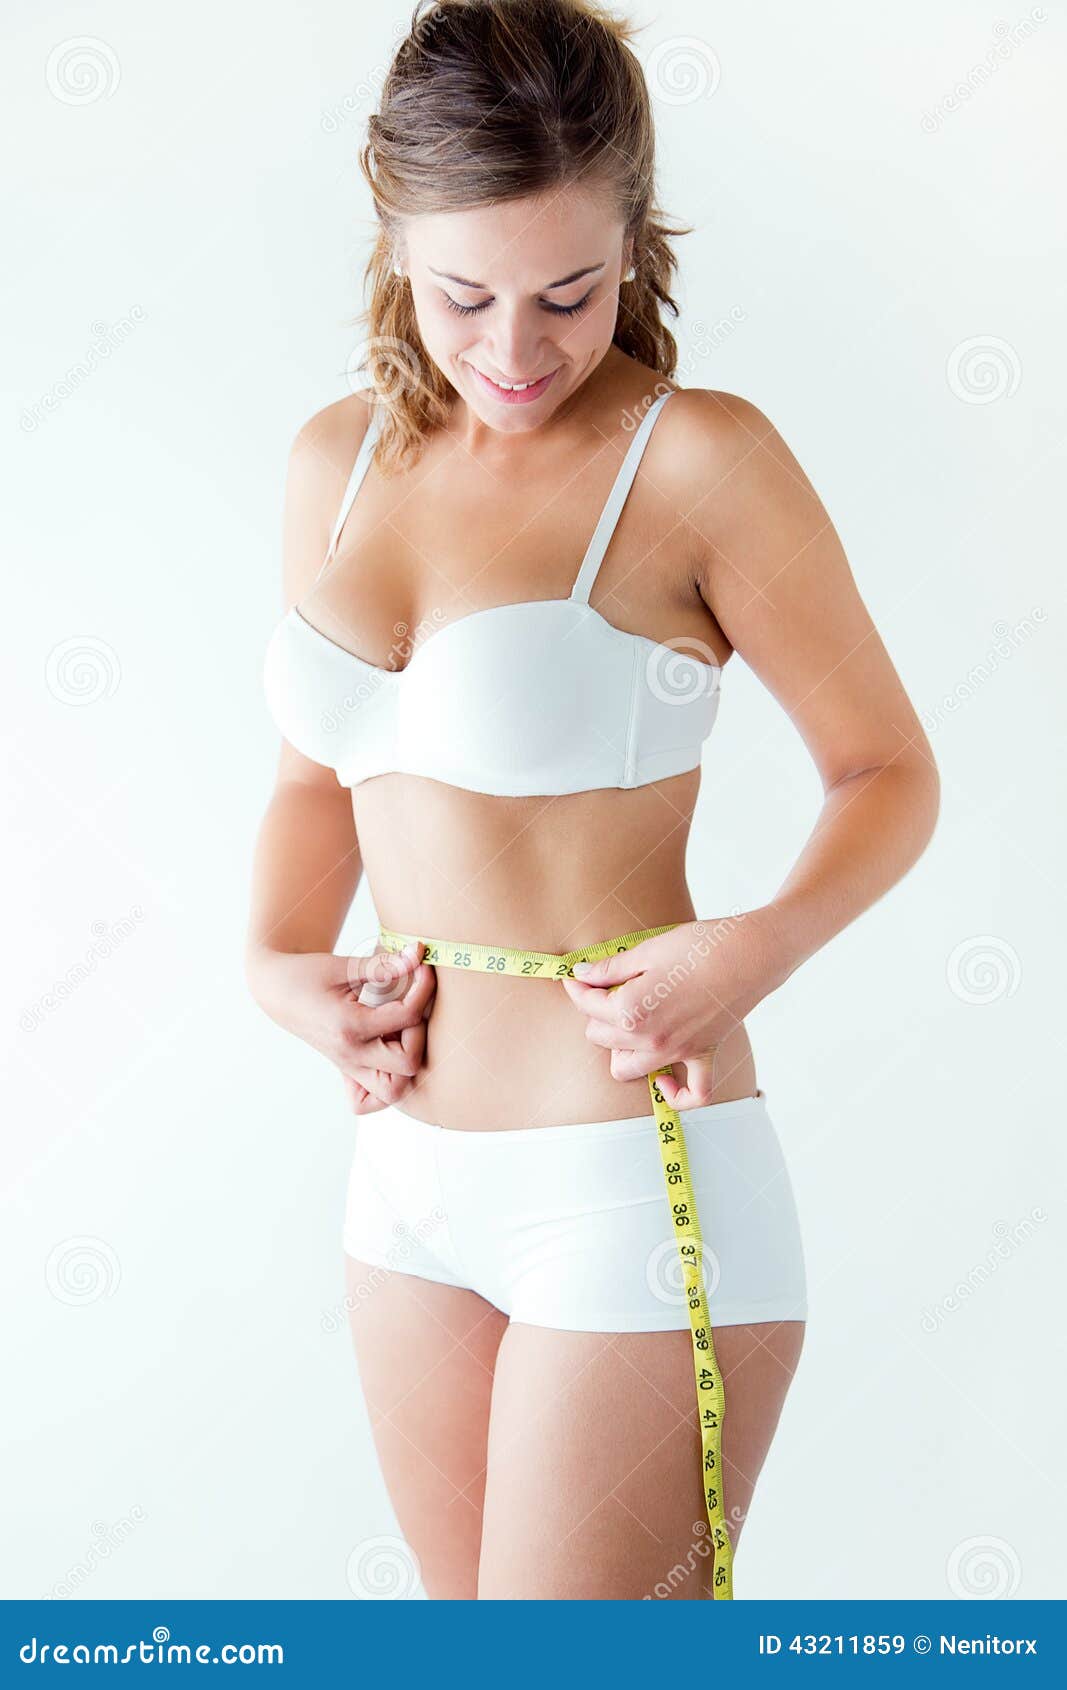 young woman measuring her waist by measure tape.